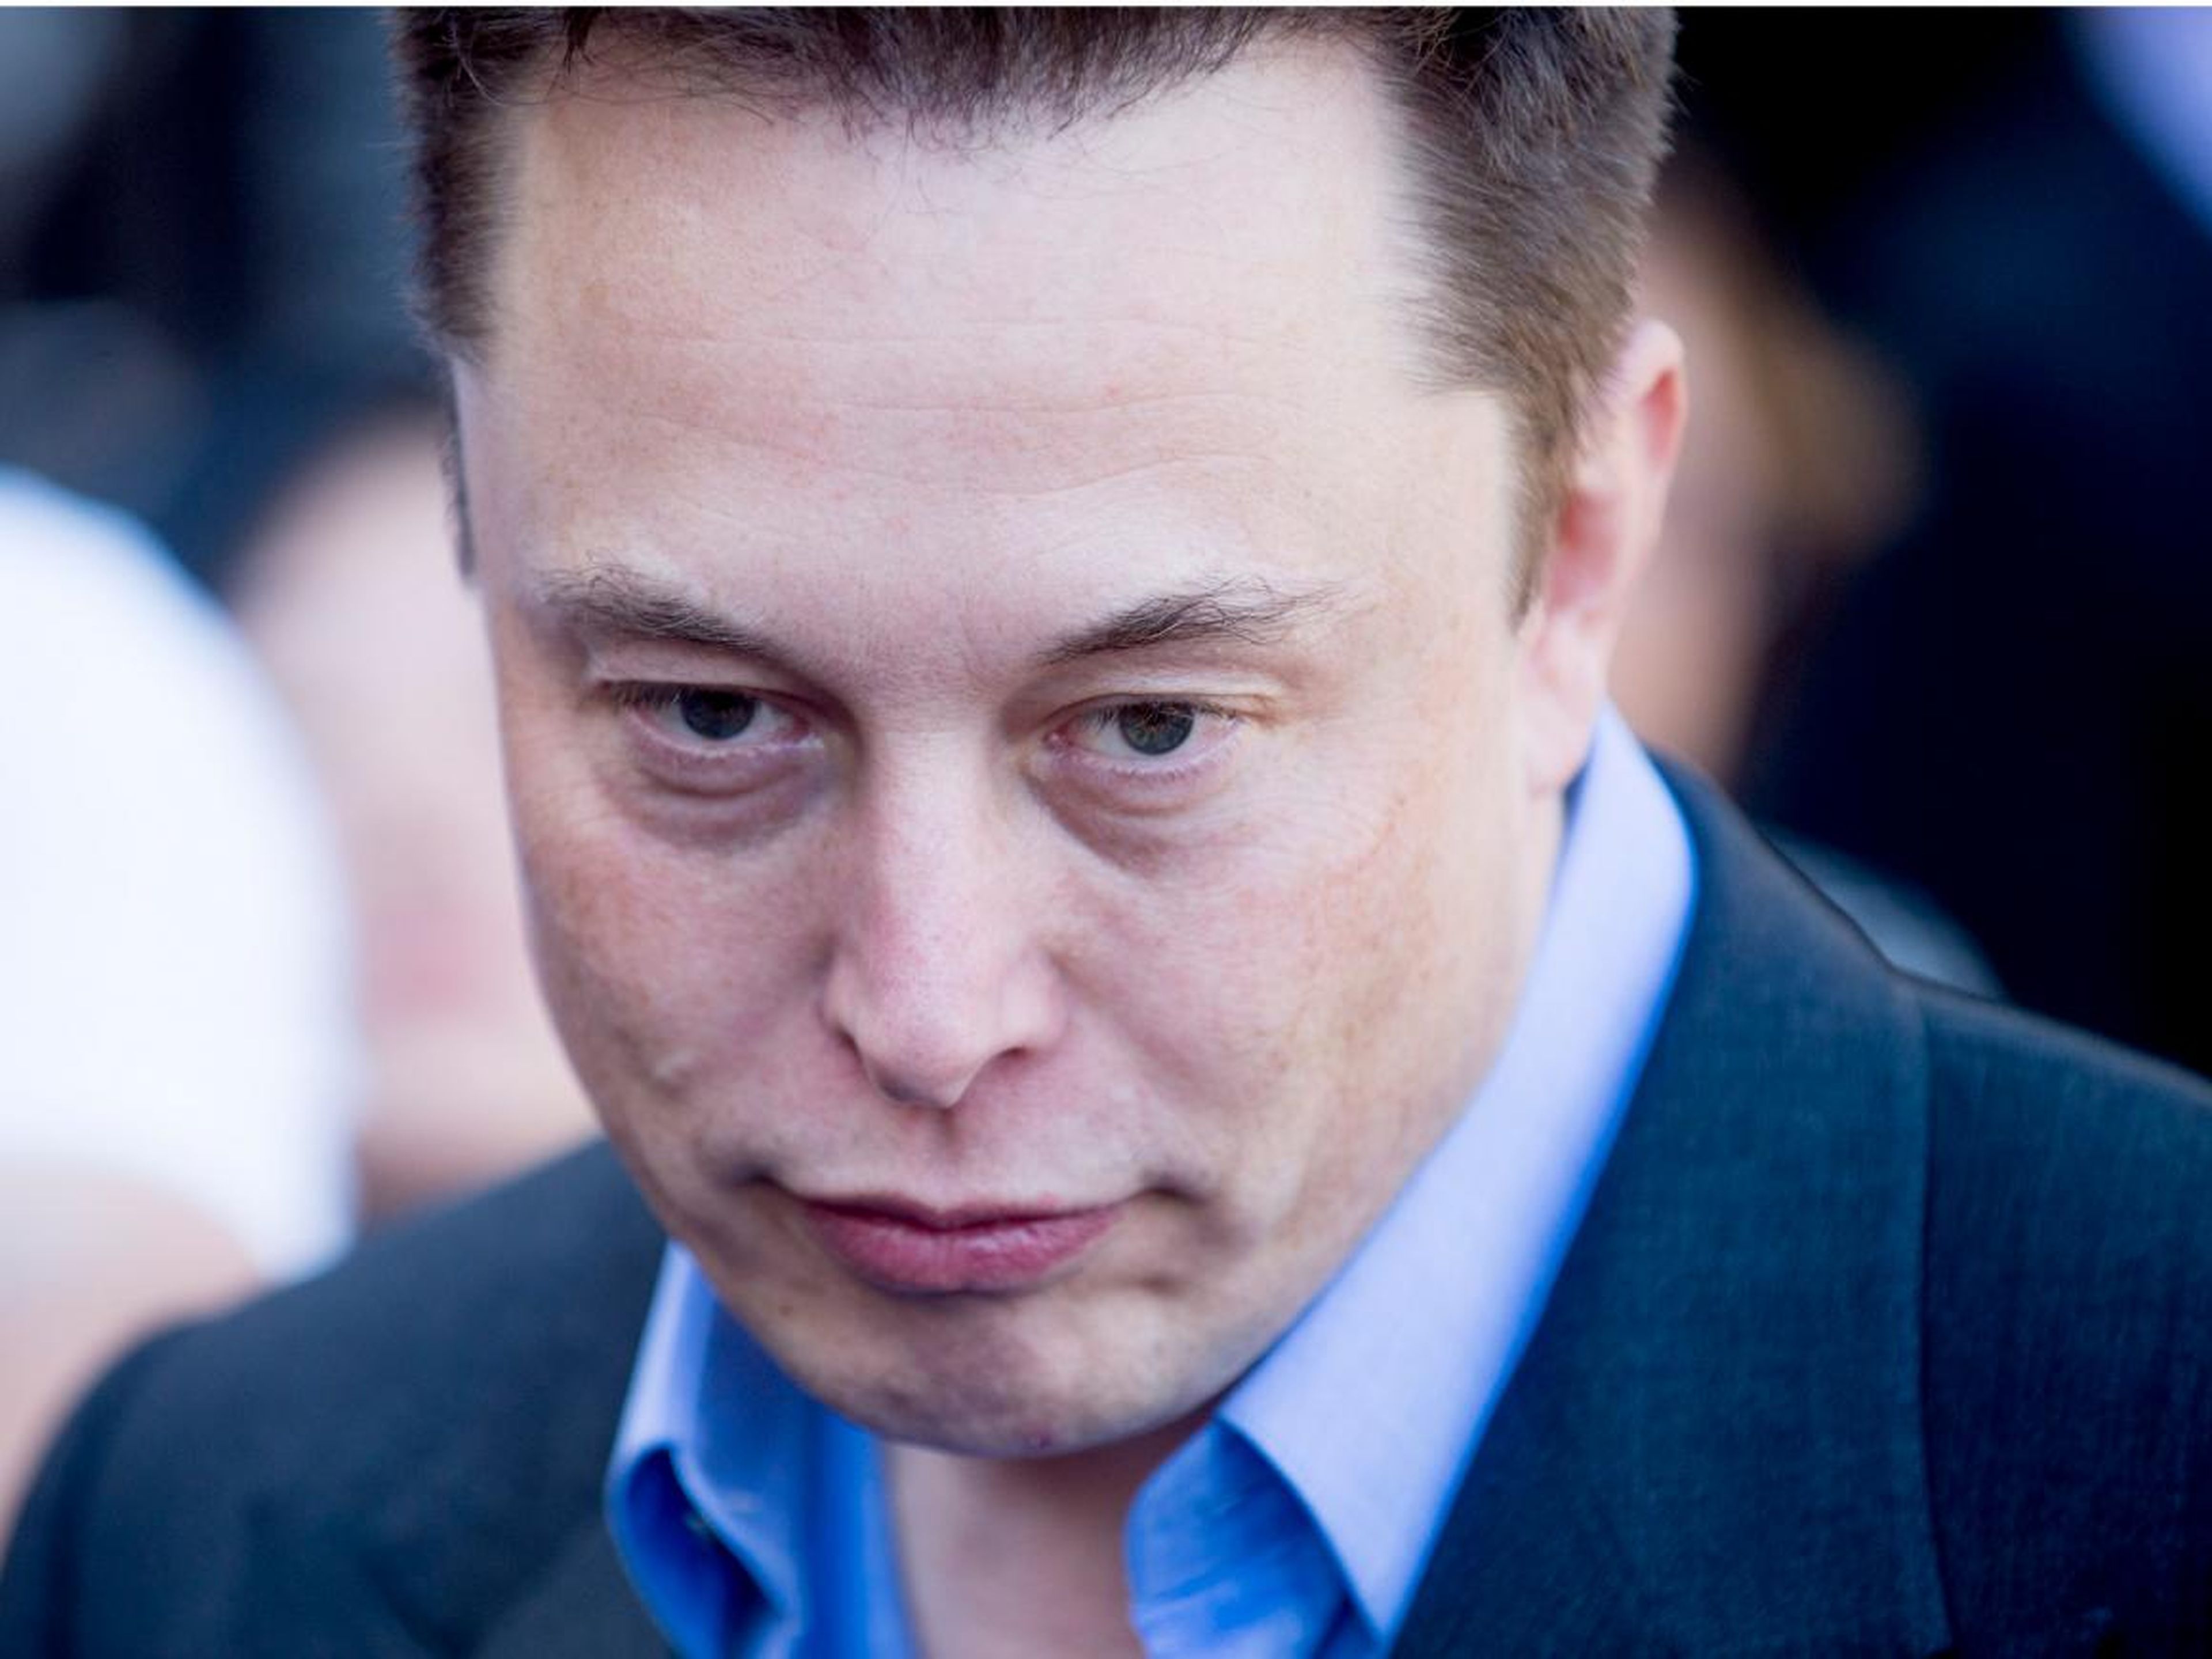 Tesla CEO Elon Musk typically crashes around 1 a.m. and wakes up at 7 a.m., averaging six hours of sleep — less than the recommended seven to eight hours.